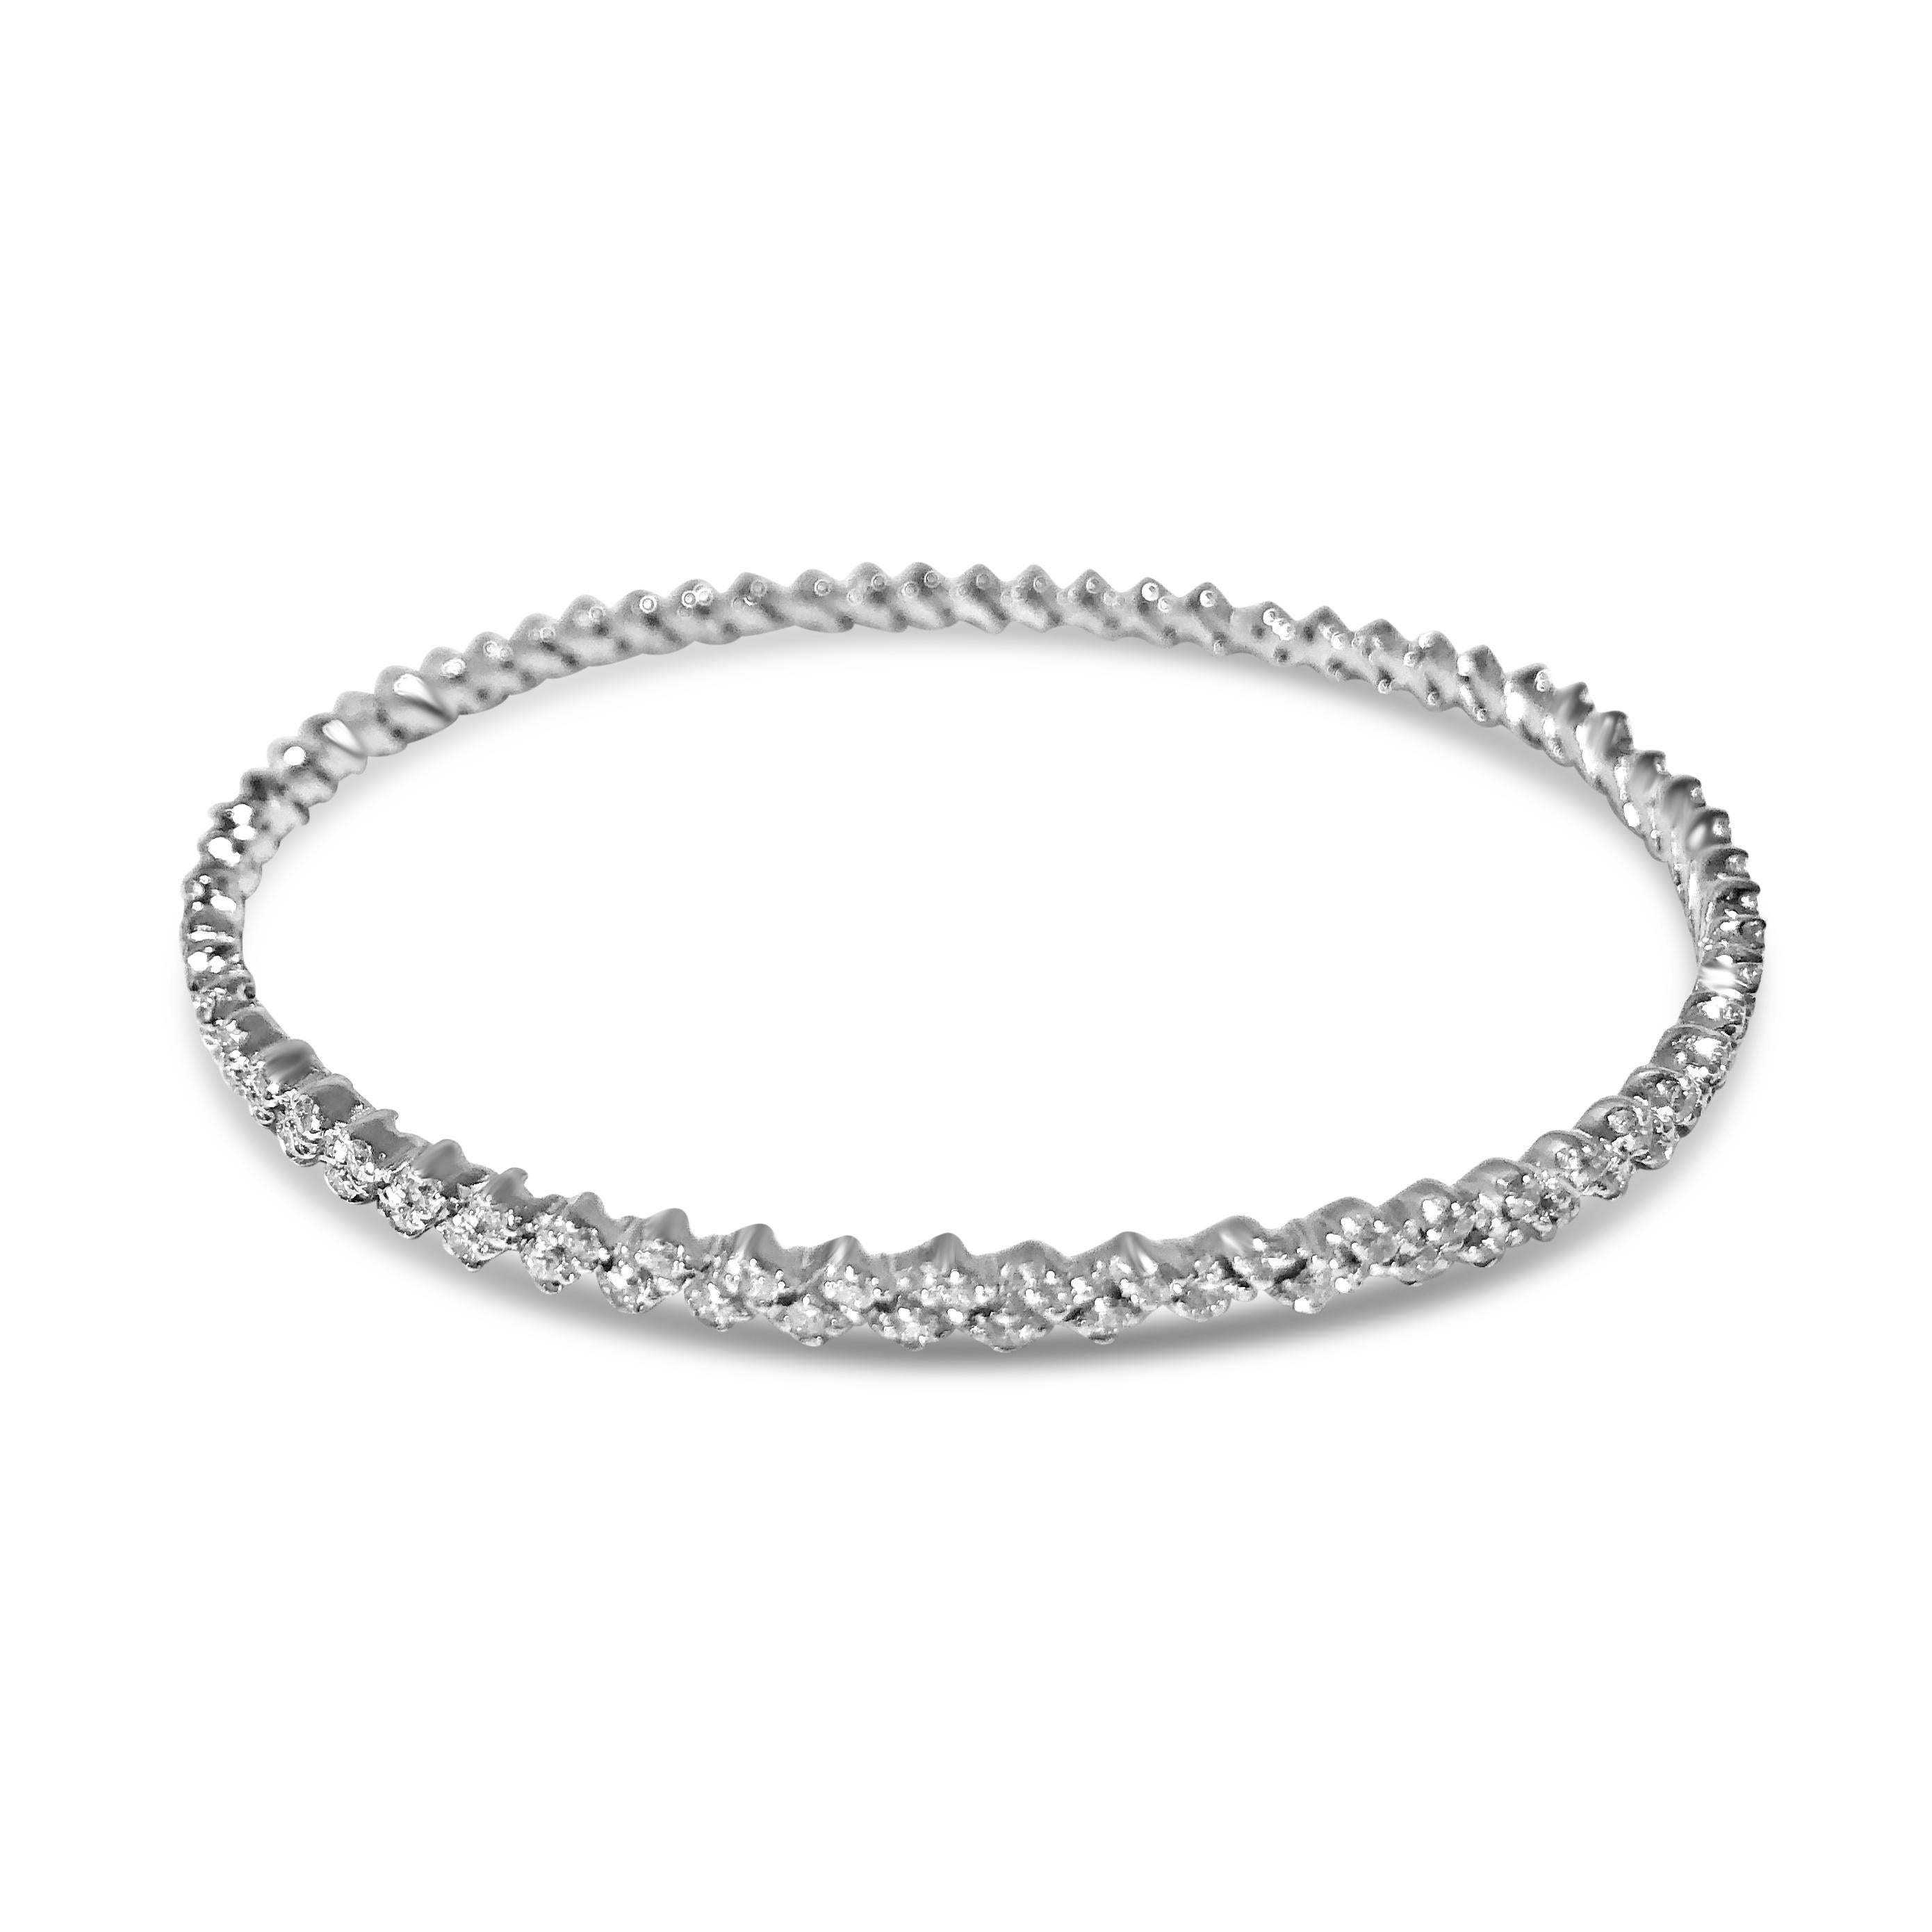 A playful take on a classic diamond bangle featuring a zig-zag chevron diamond pattern. Our round, 14K white gold bangle slips over the wrist and features 126 brilliant round 1.5mm and 1.6mm white diamonds, totaling 2.08ct

Specifications:
-